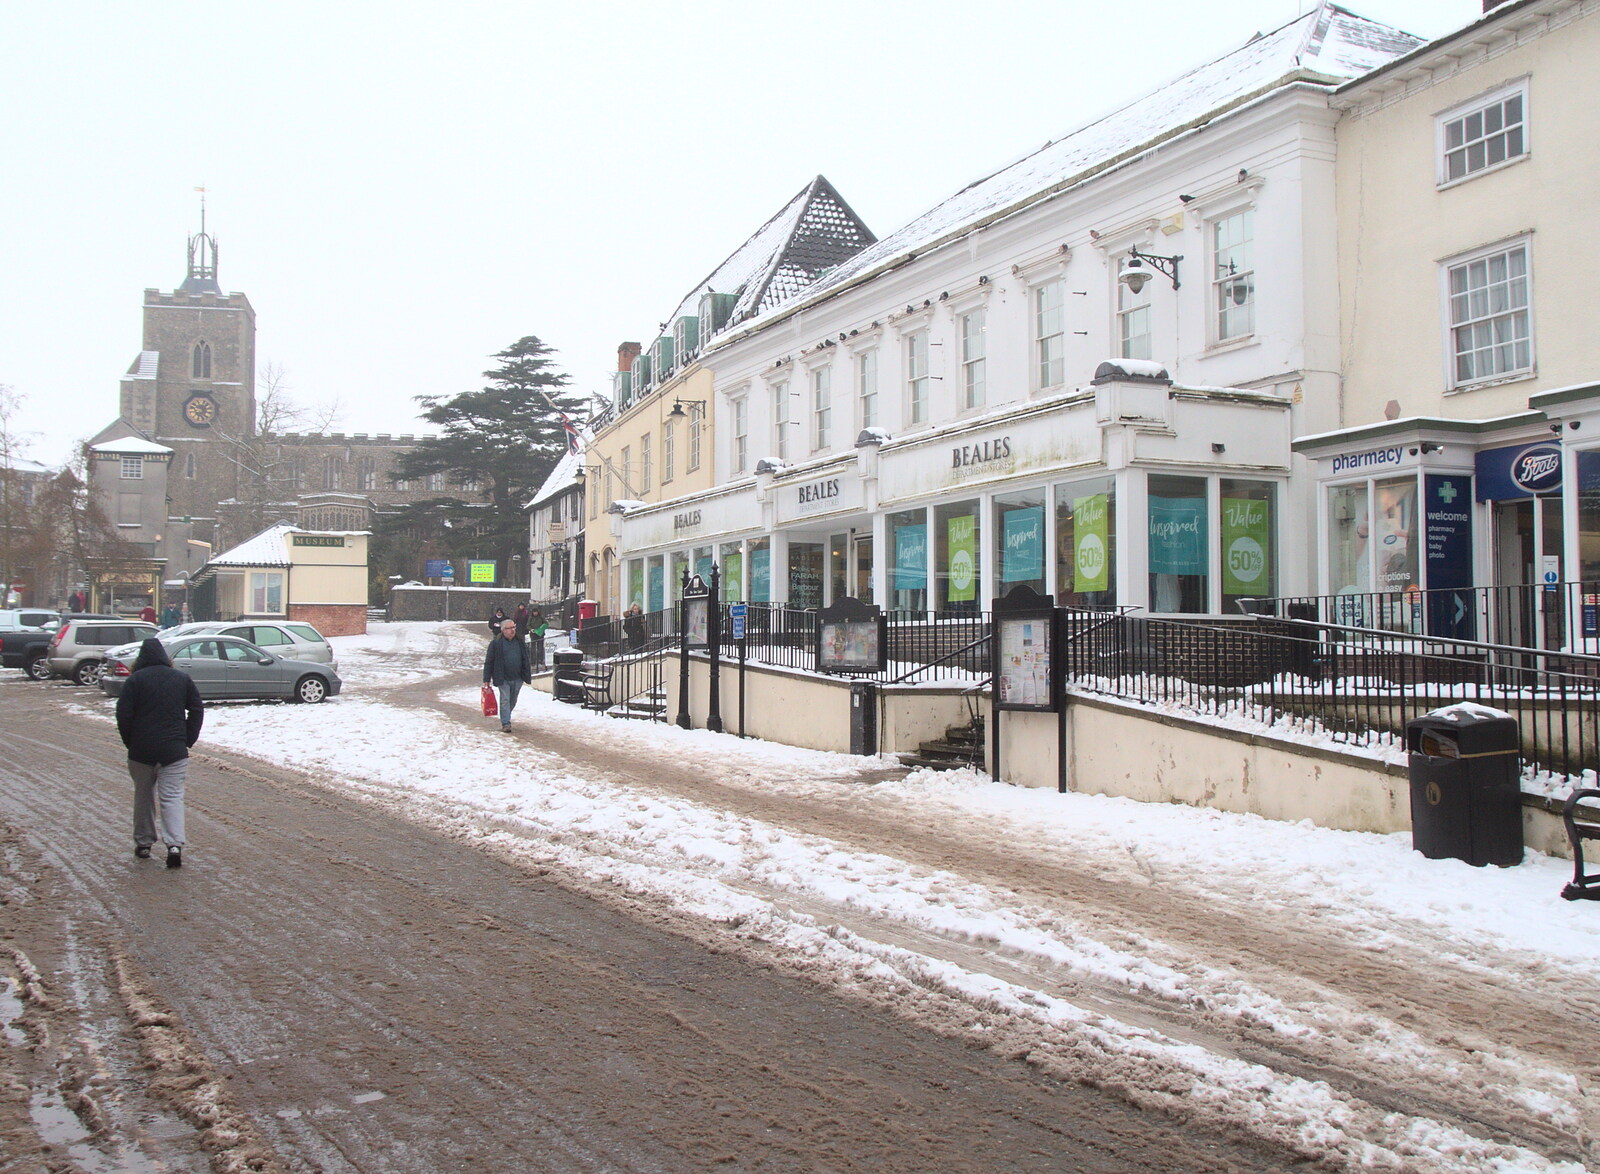 Diss Market Place, and Beales Department Store from More March Snow and a Postcard from Diss, Norfolk - 3rd March 2018